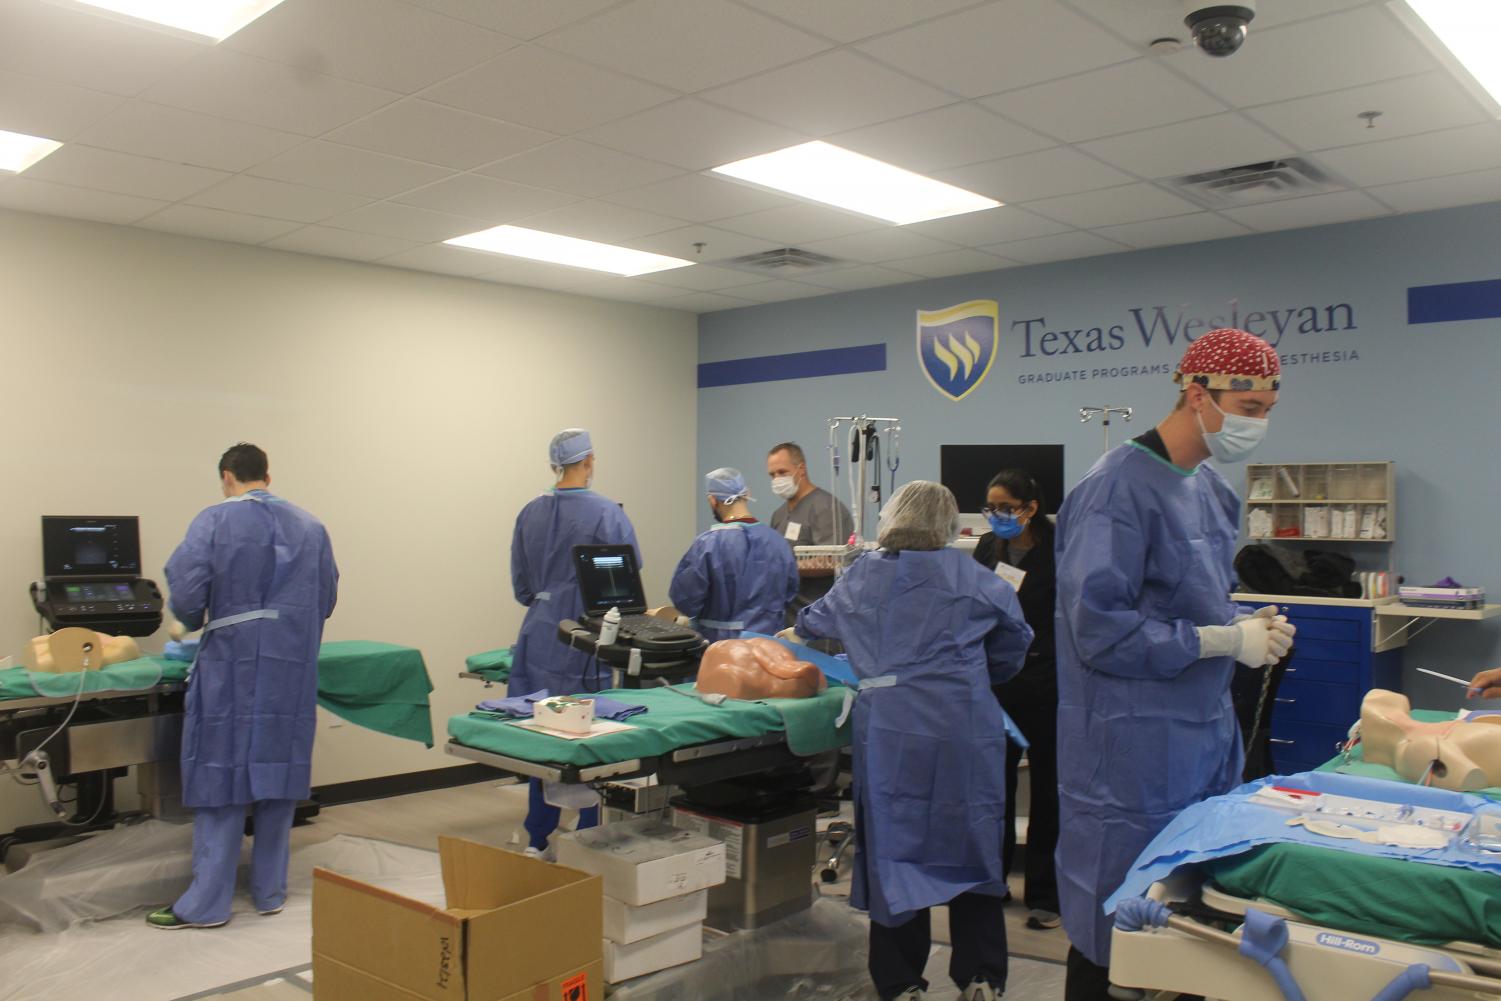 GPNA+students+from+around+the+country+visit+new+TxWes+Simulation+Center